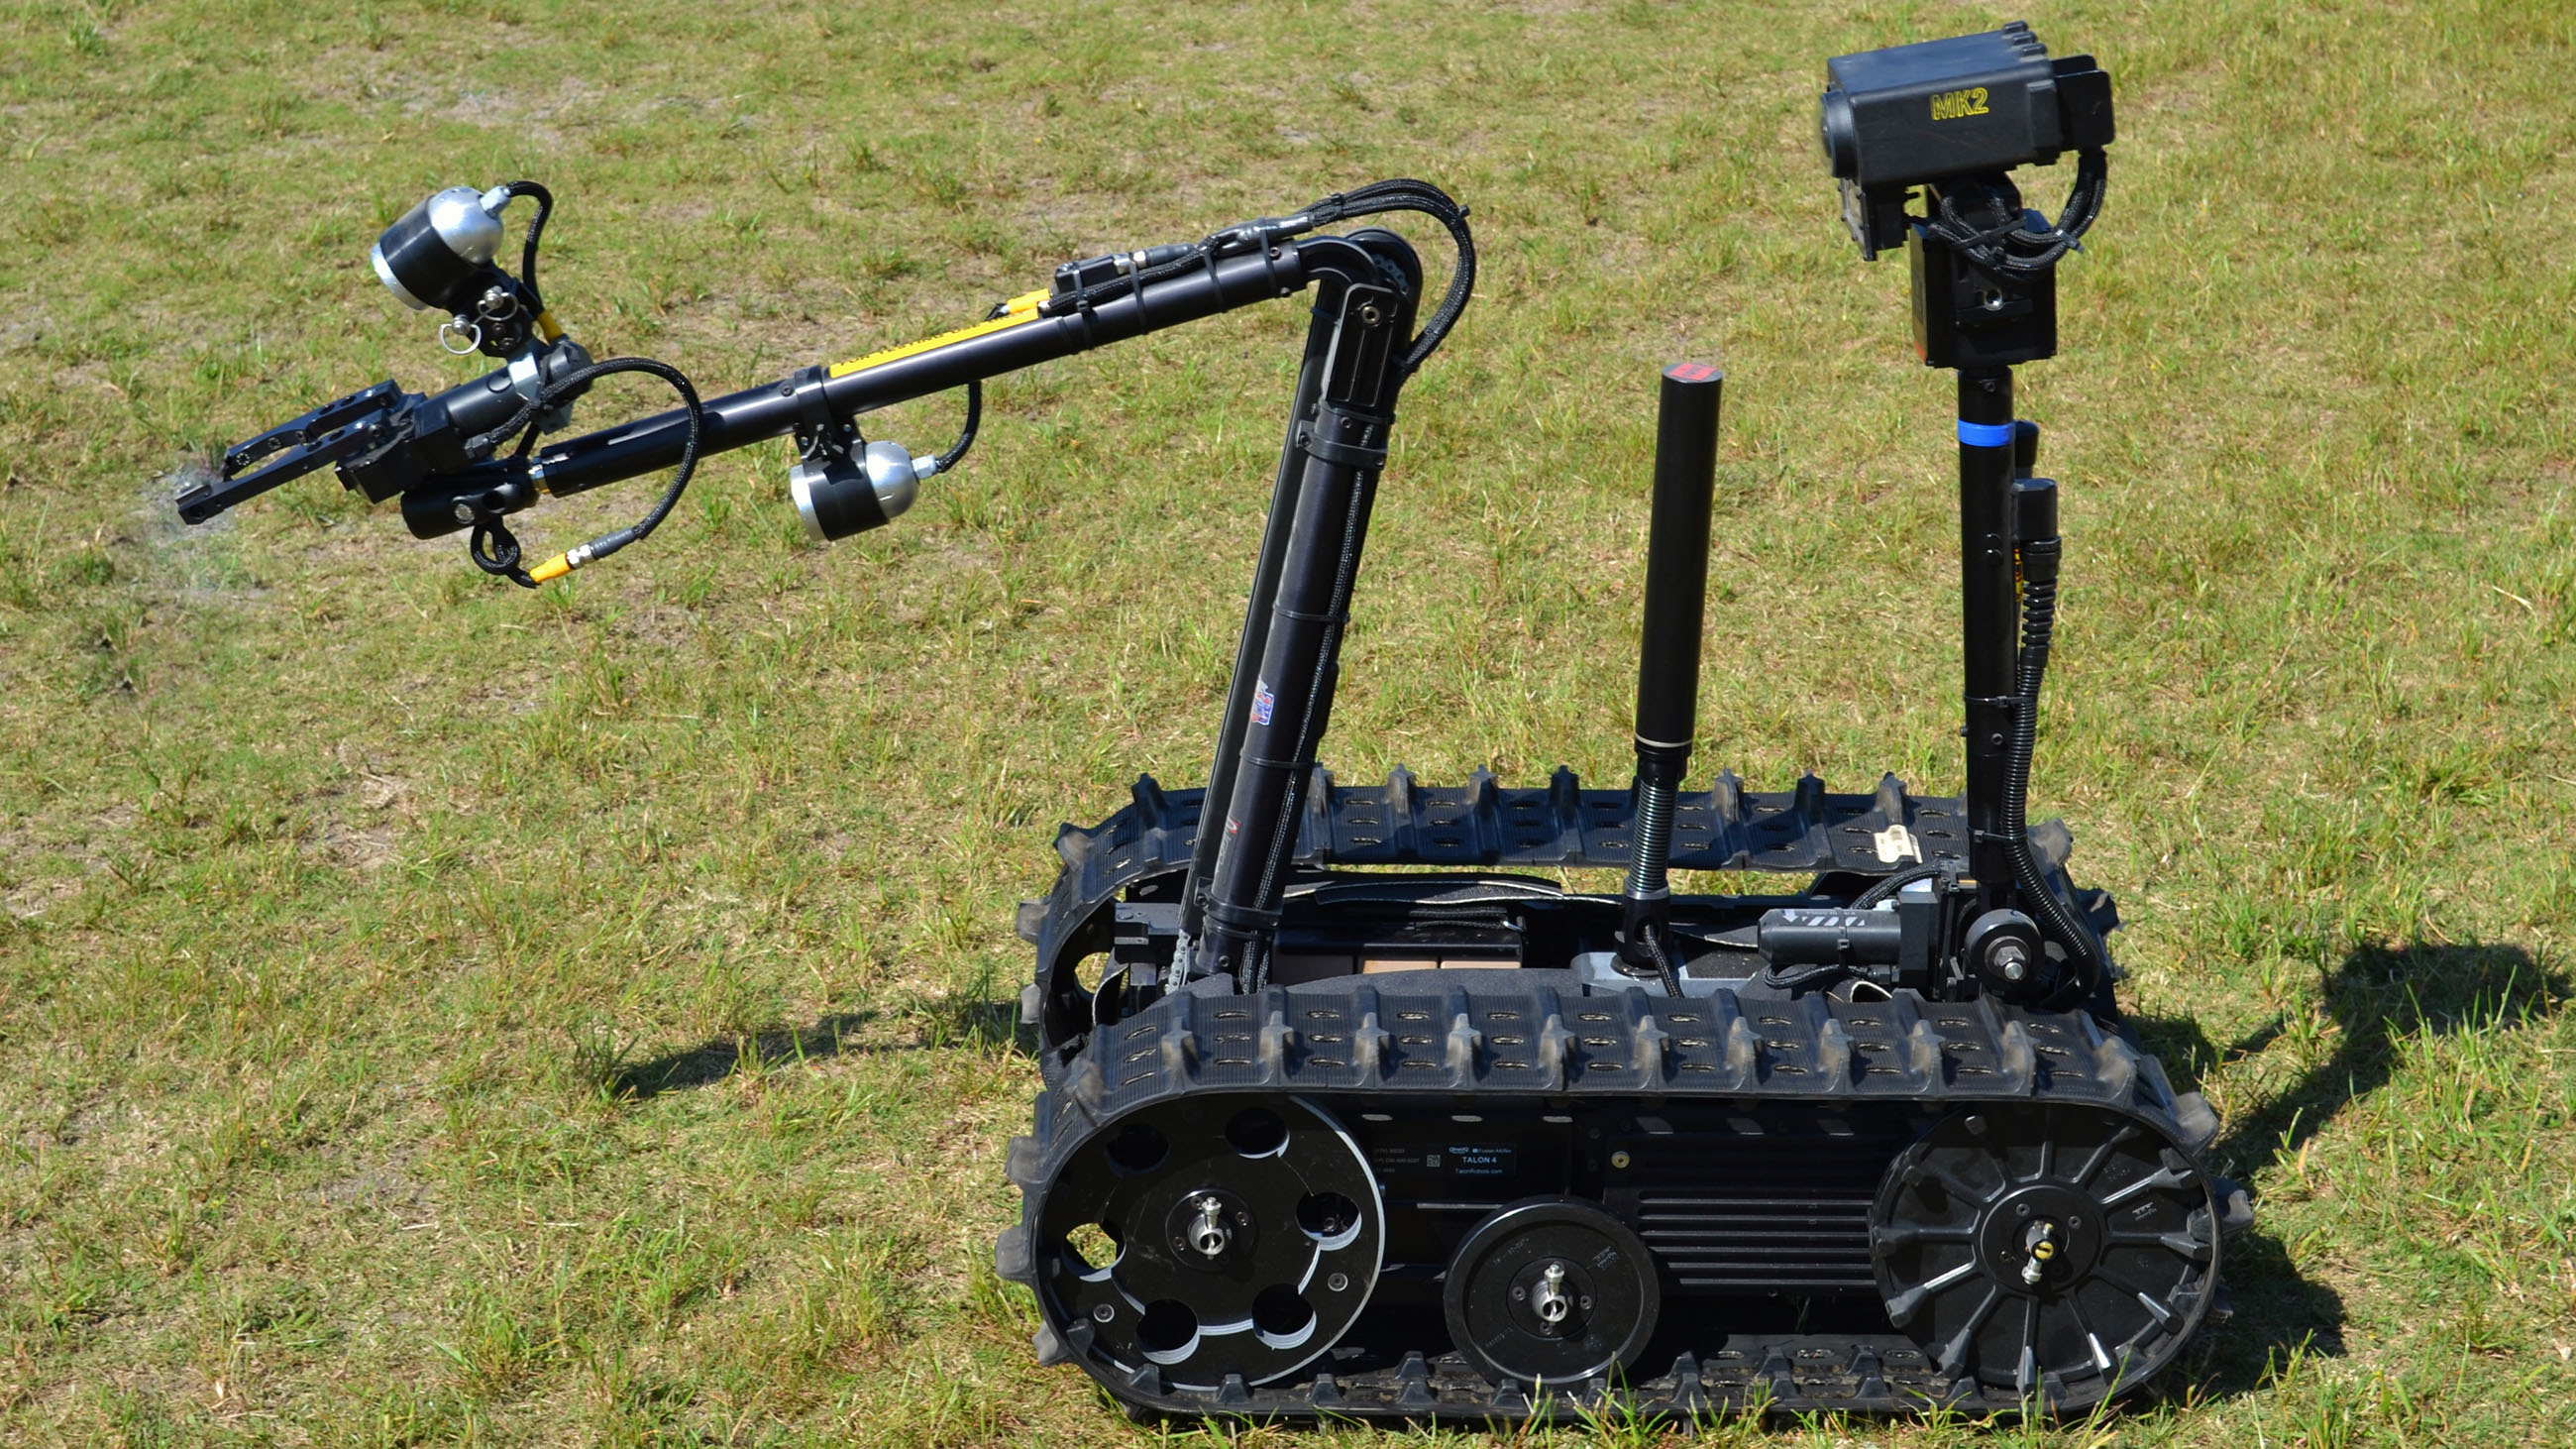 Some critics say the use of a bomb robot to kill the Dallas police shooter blurs the lines between policing and warfare.